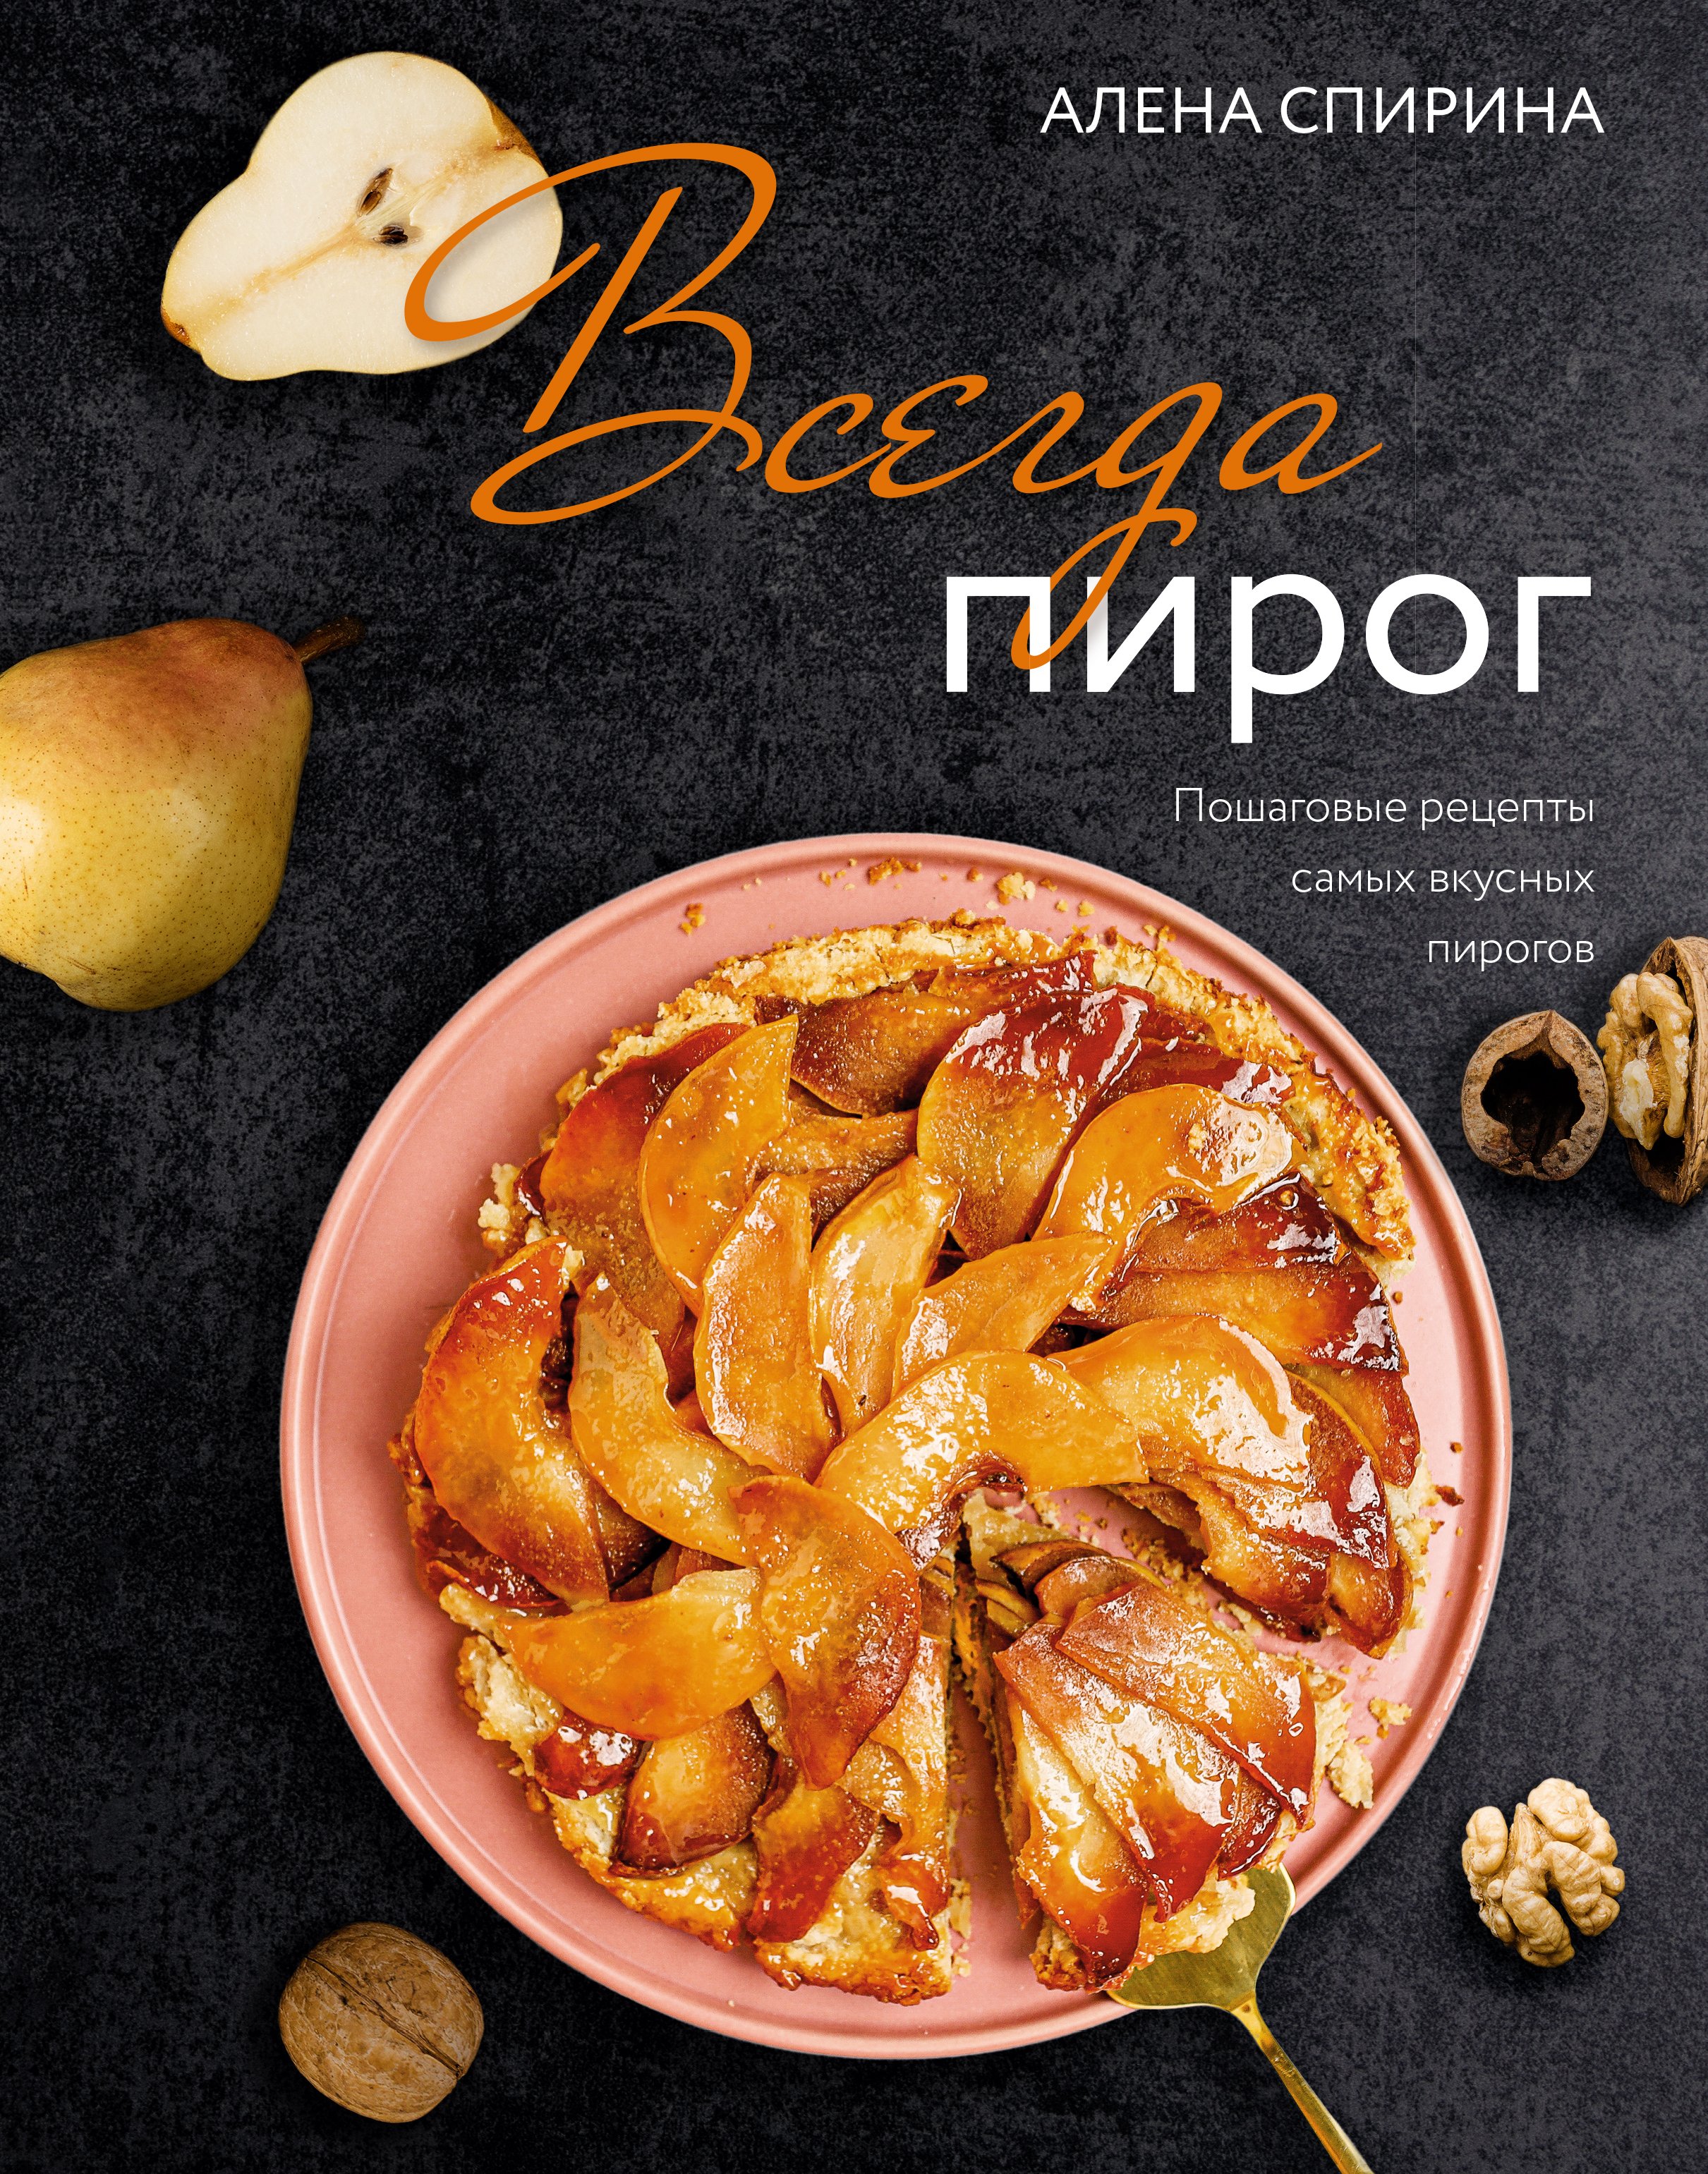 Russian Foodie Autumn 2014